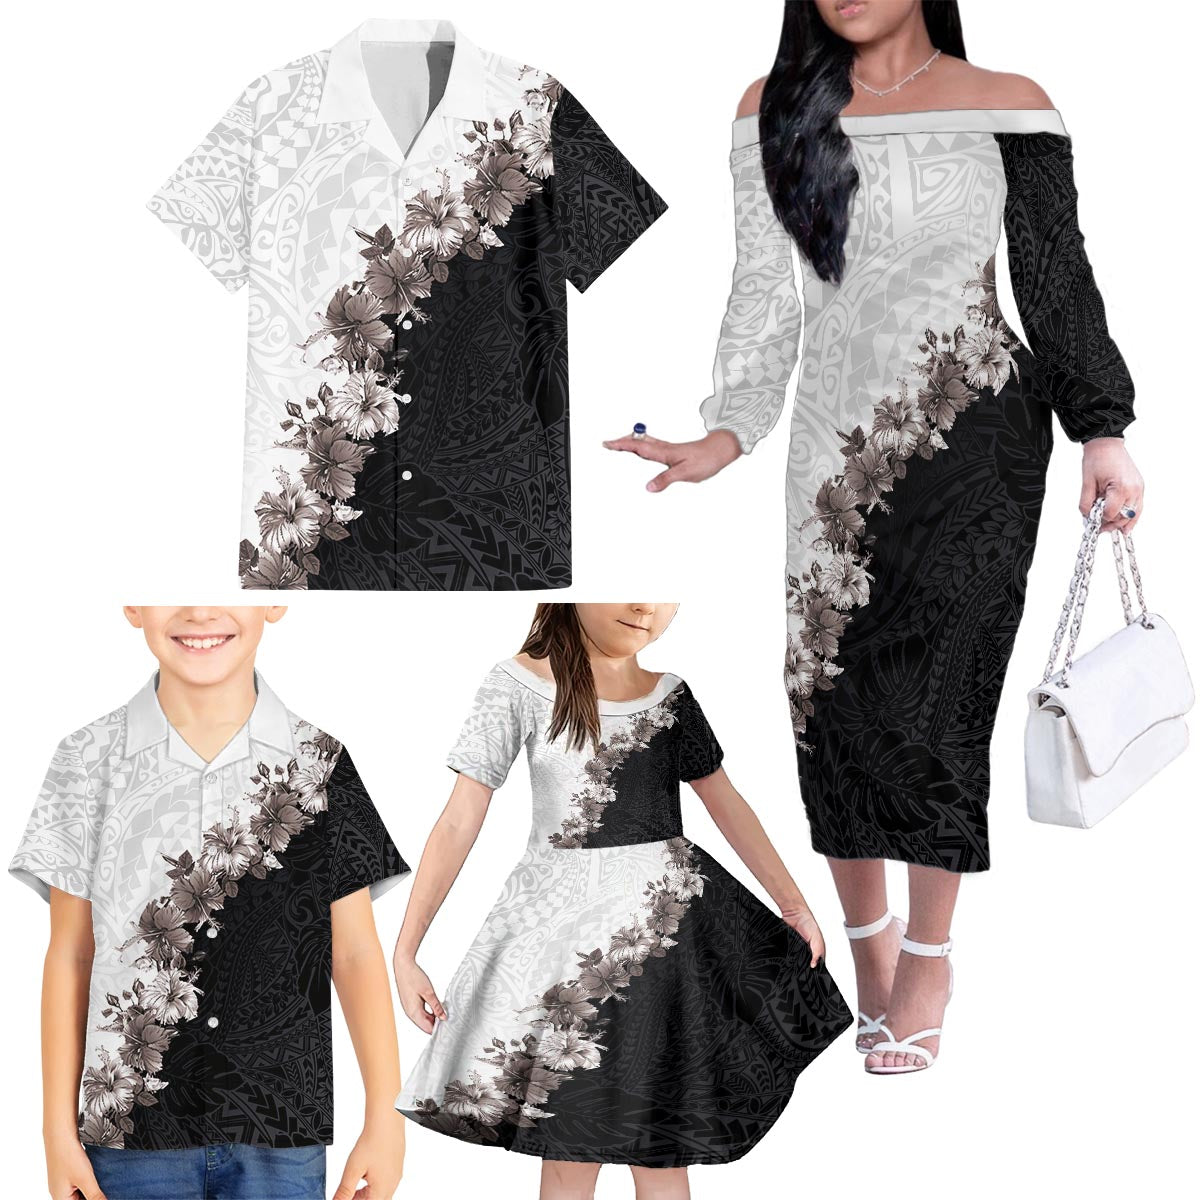 Hawaii Grayscale Hibiscus Flowers Family Matching Off The Shoulder Long Sleeve Dress and Hawaiian Shirt Polynesian Pattern With Half Black White Version